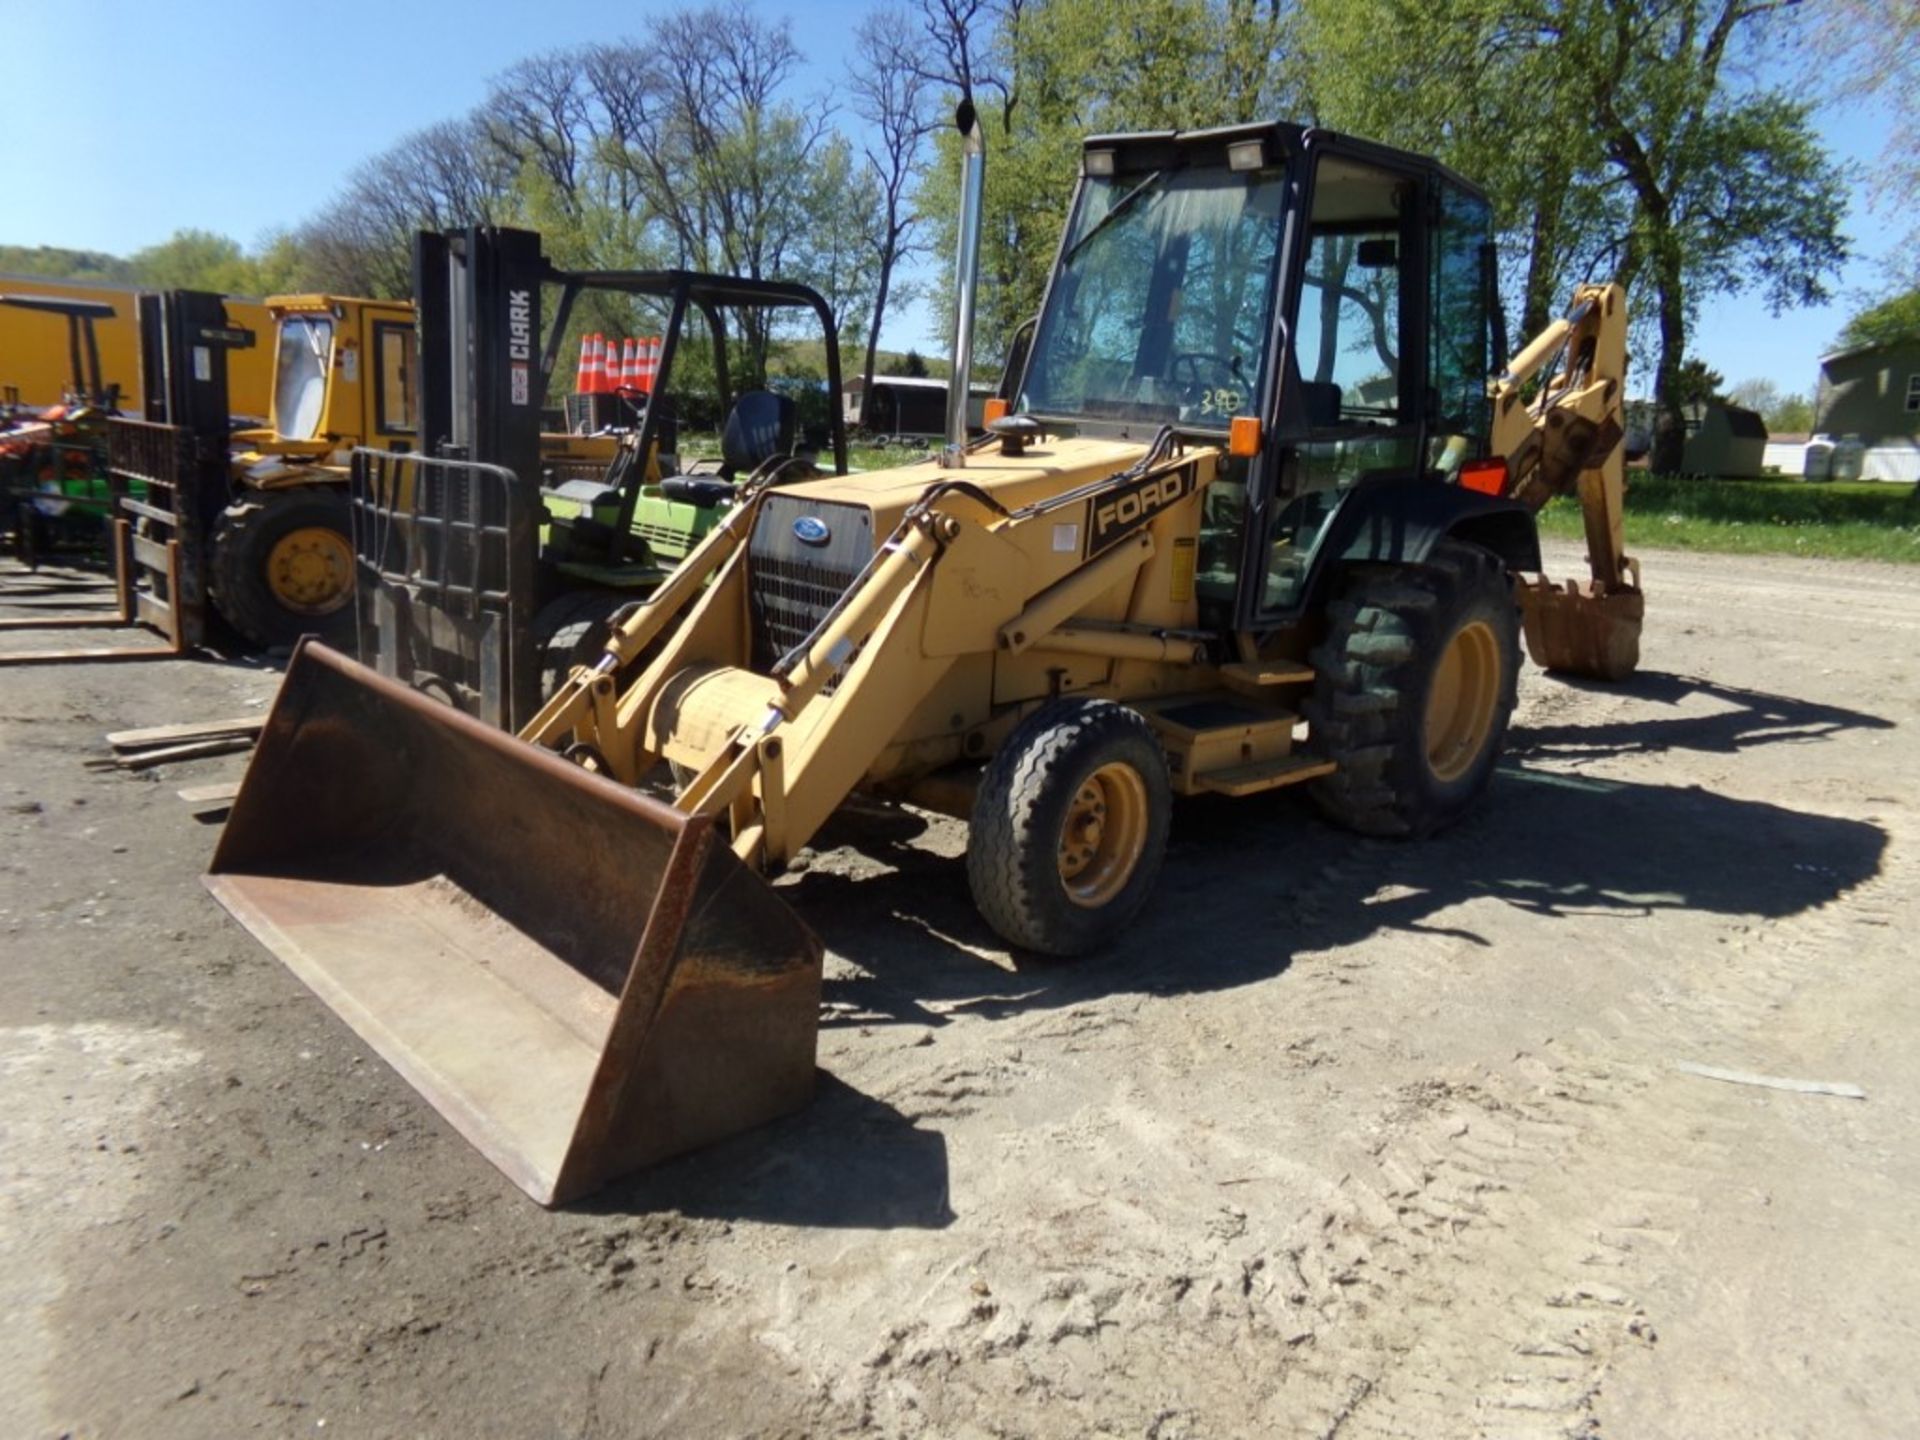 Ford 455C Backhoe with 88'' Loader Bucket and 24'' Backhoe Bucket, Model SA40189, 1723 Hrs., All